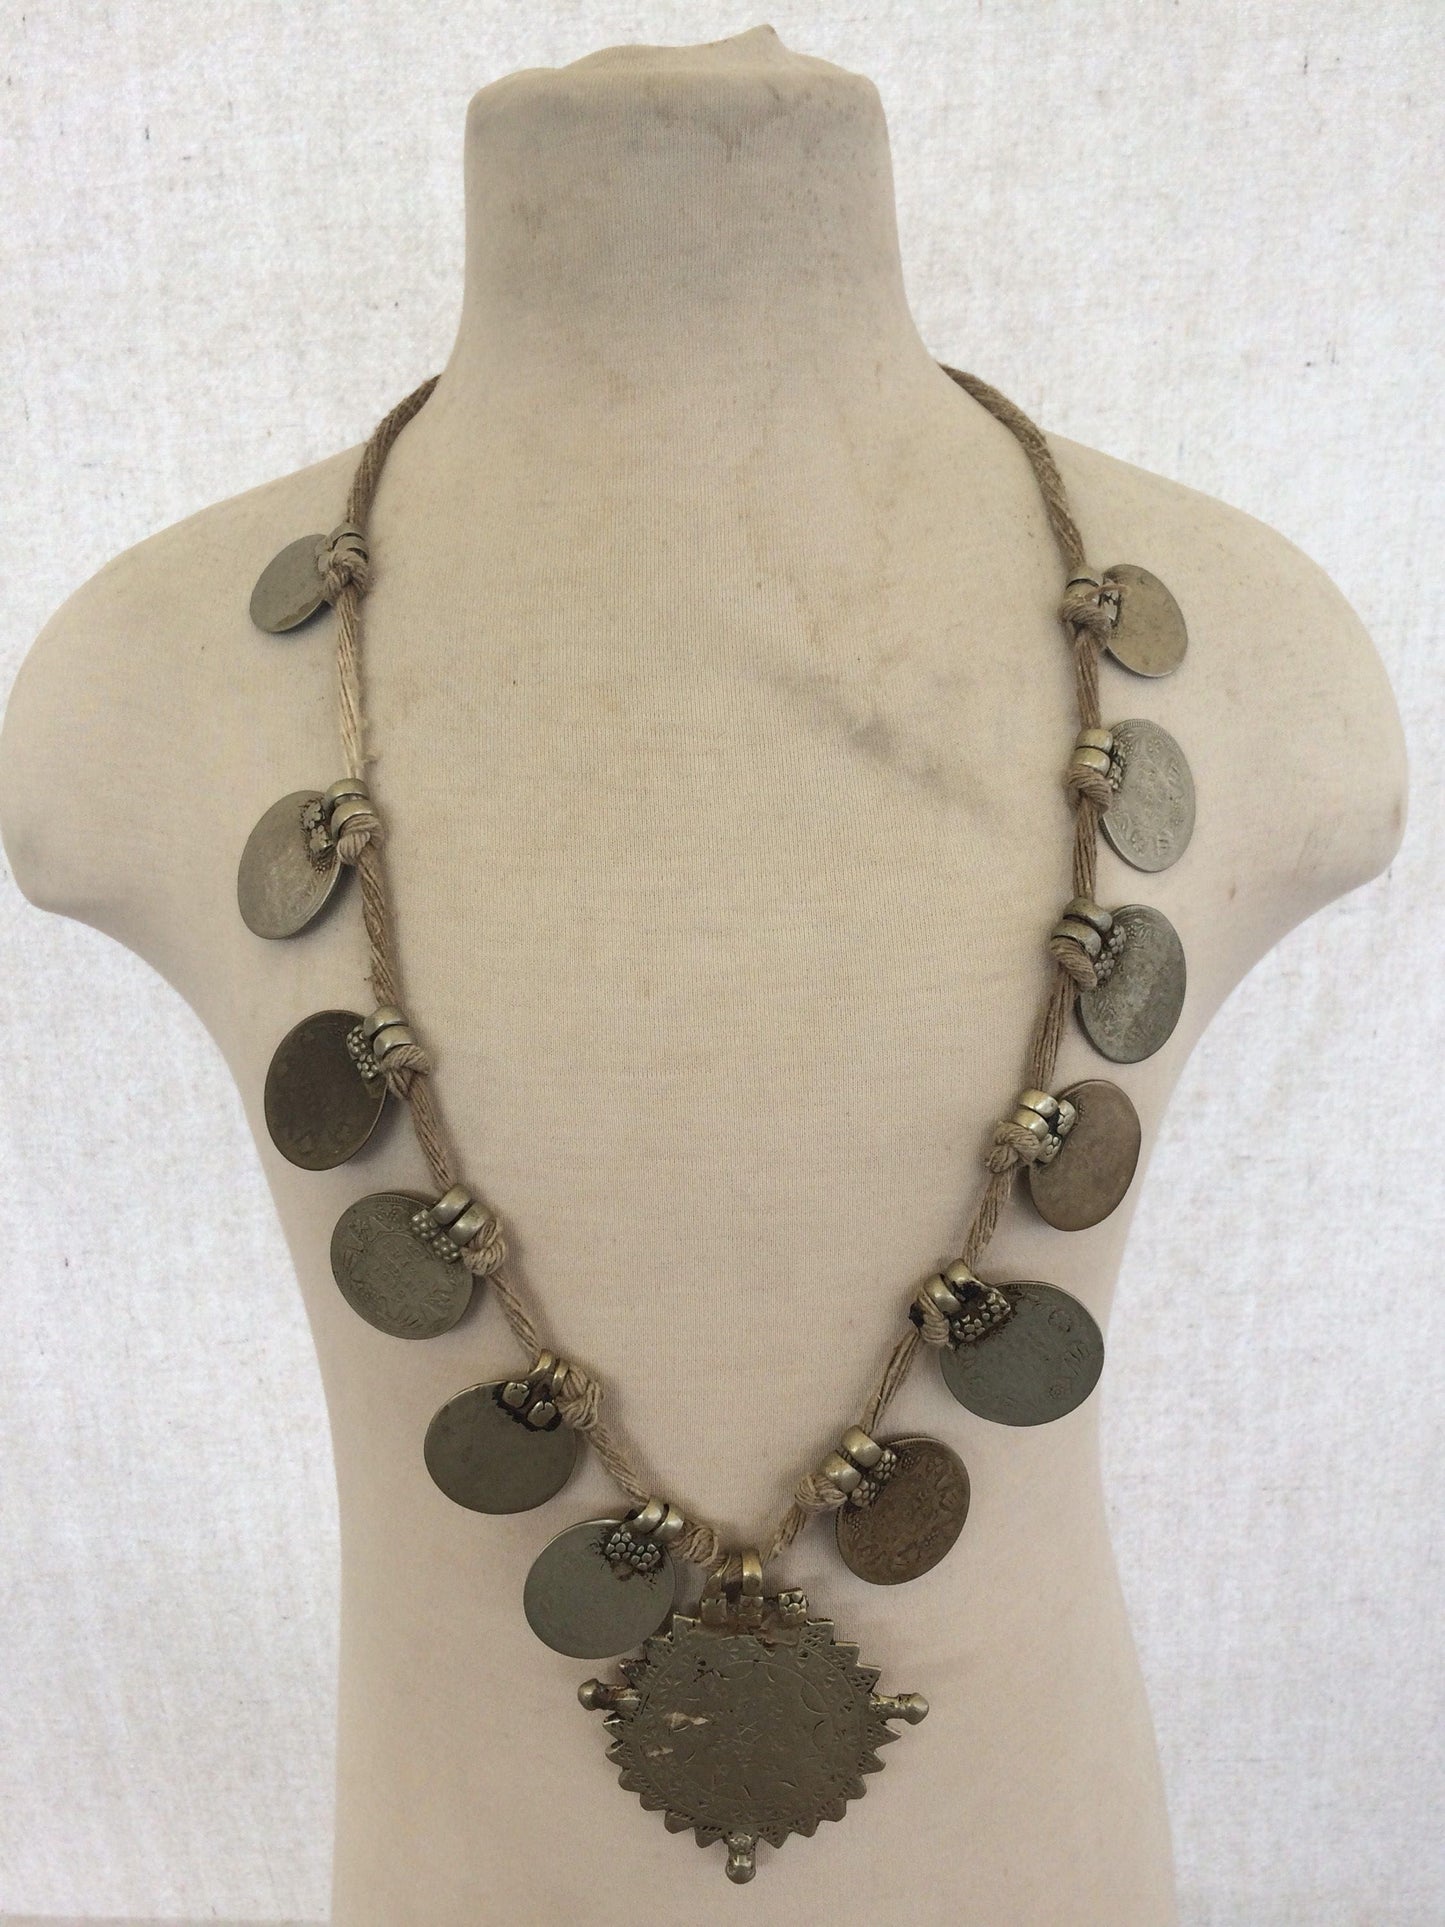 Vintage Tribal Coin Rupee Necklace with Old String from India